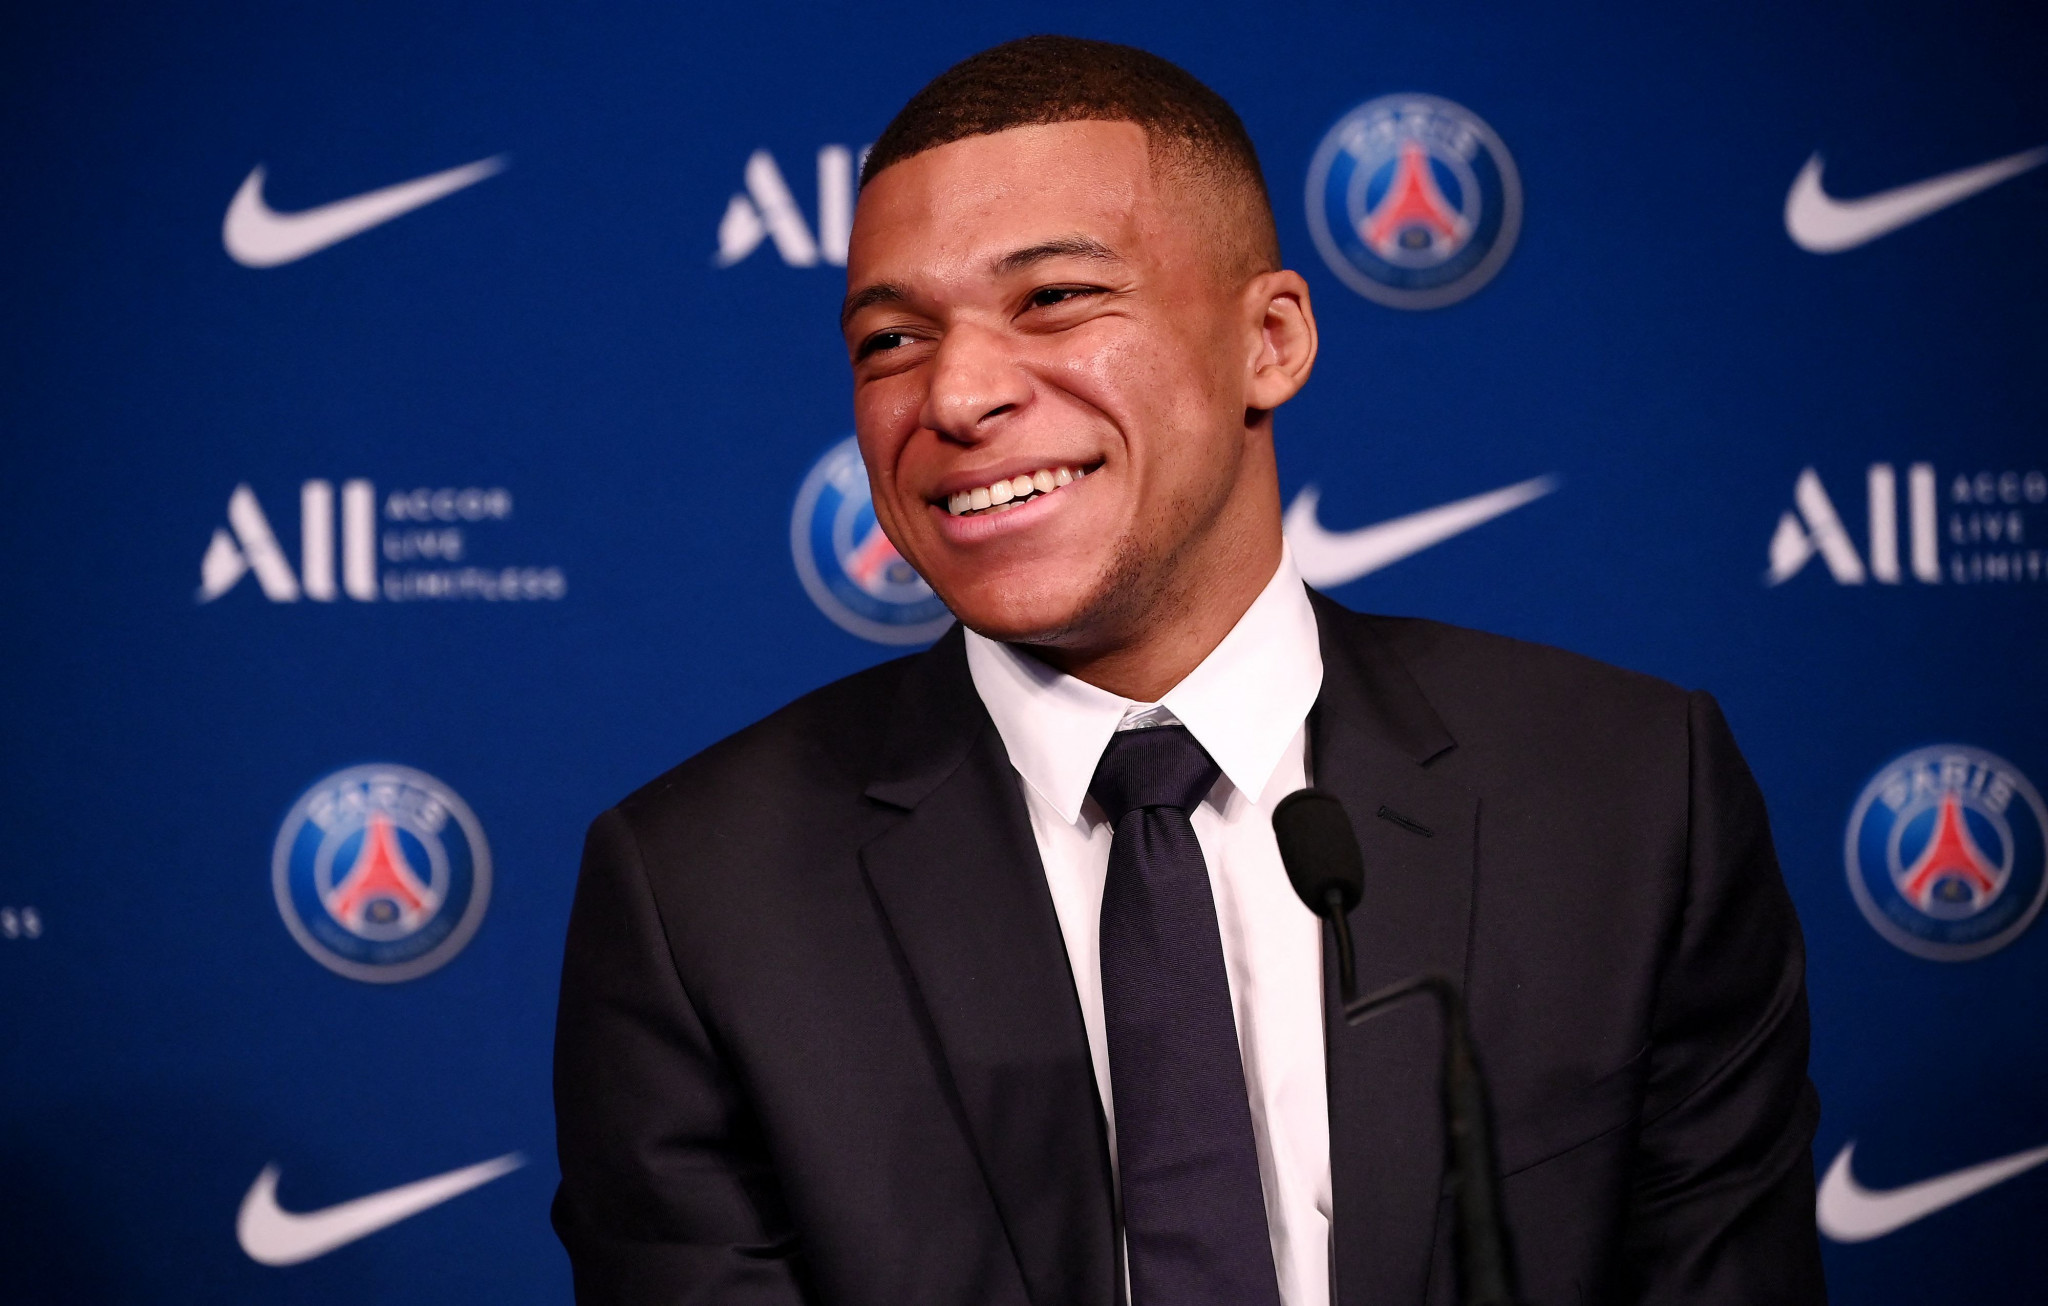 Kylian Mbappé signed a three-year extension with PSG last week ©Getty Images